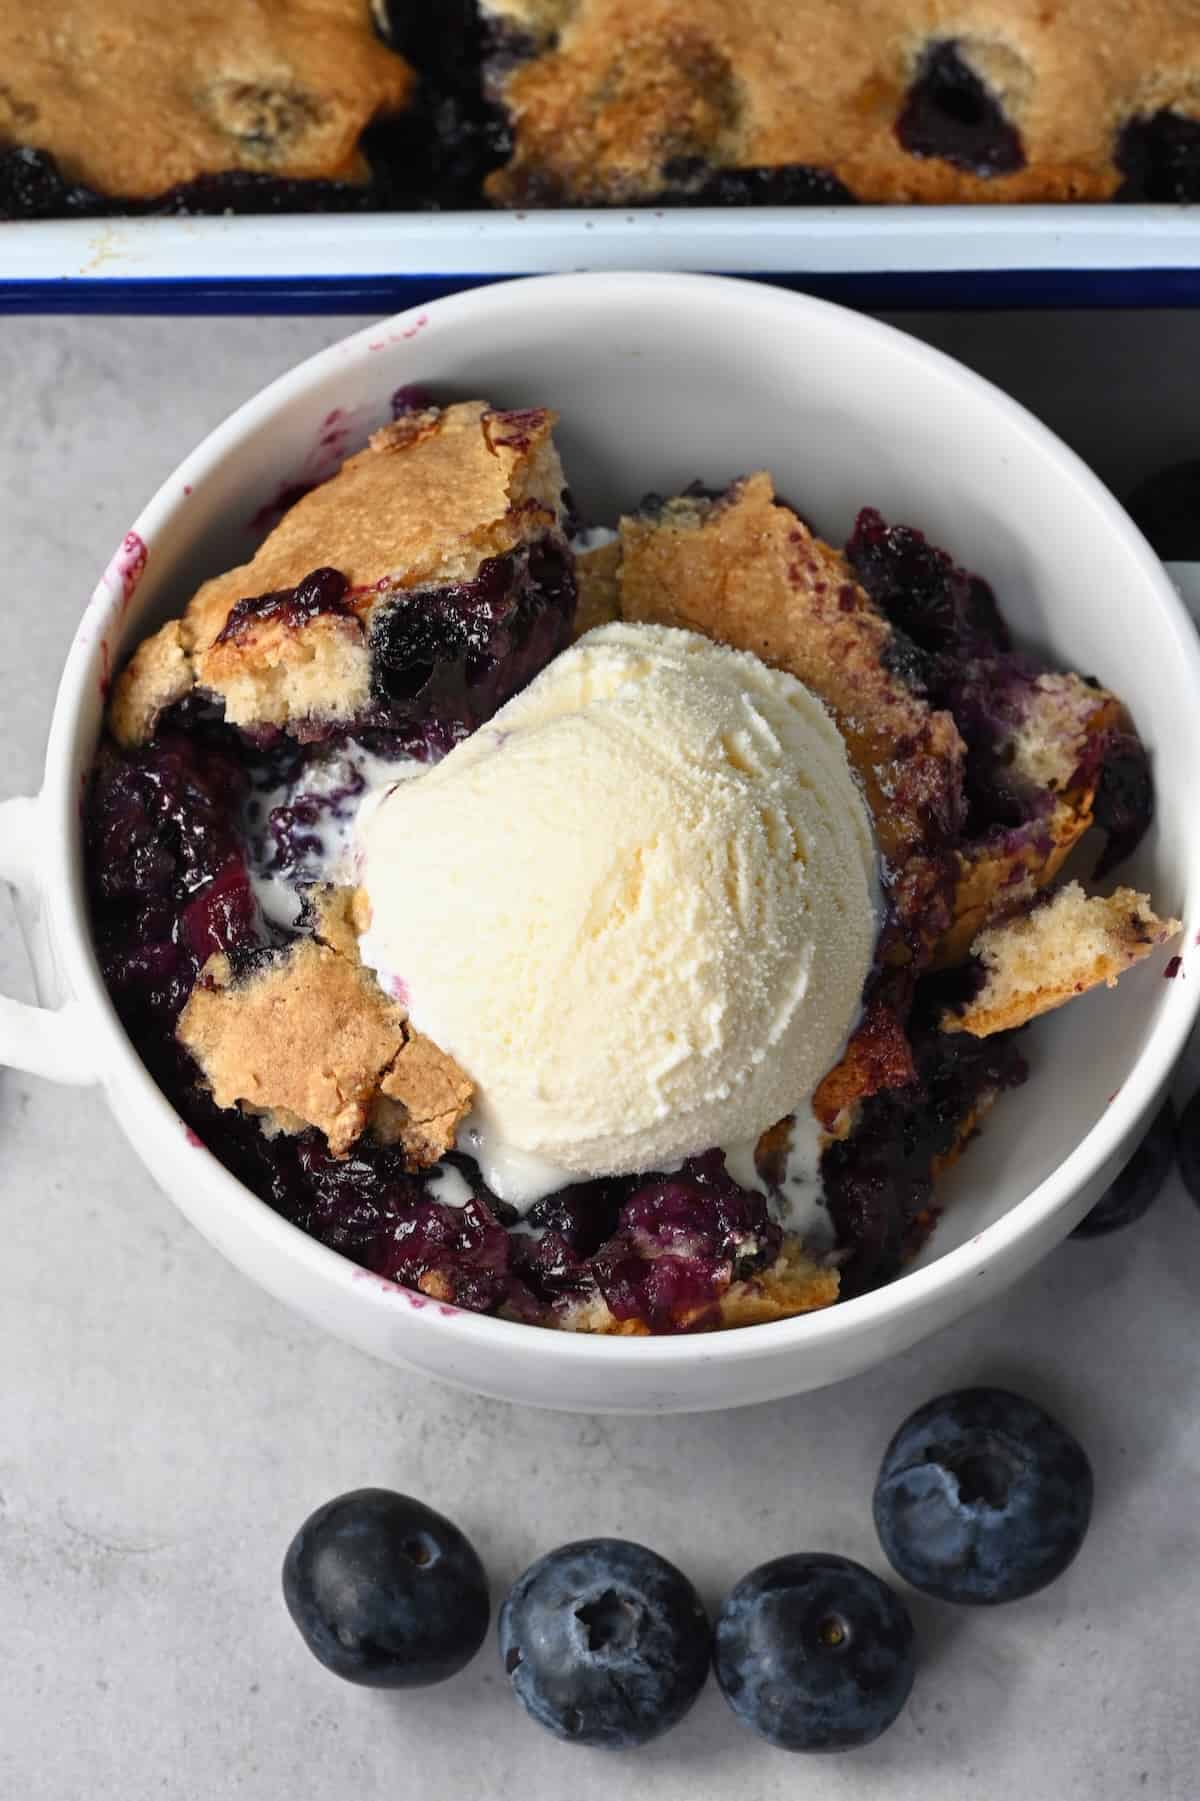 A serving of blueberry cobbler with a scoop of ice cream